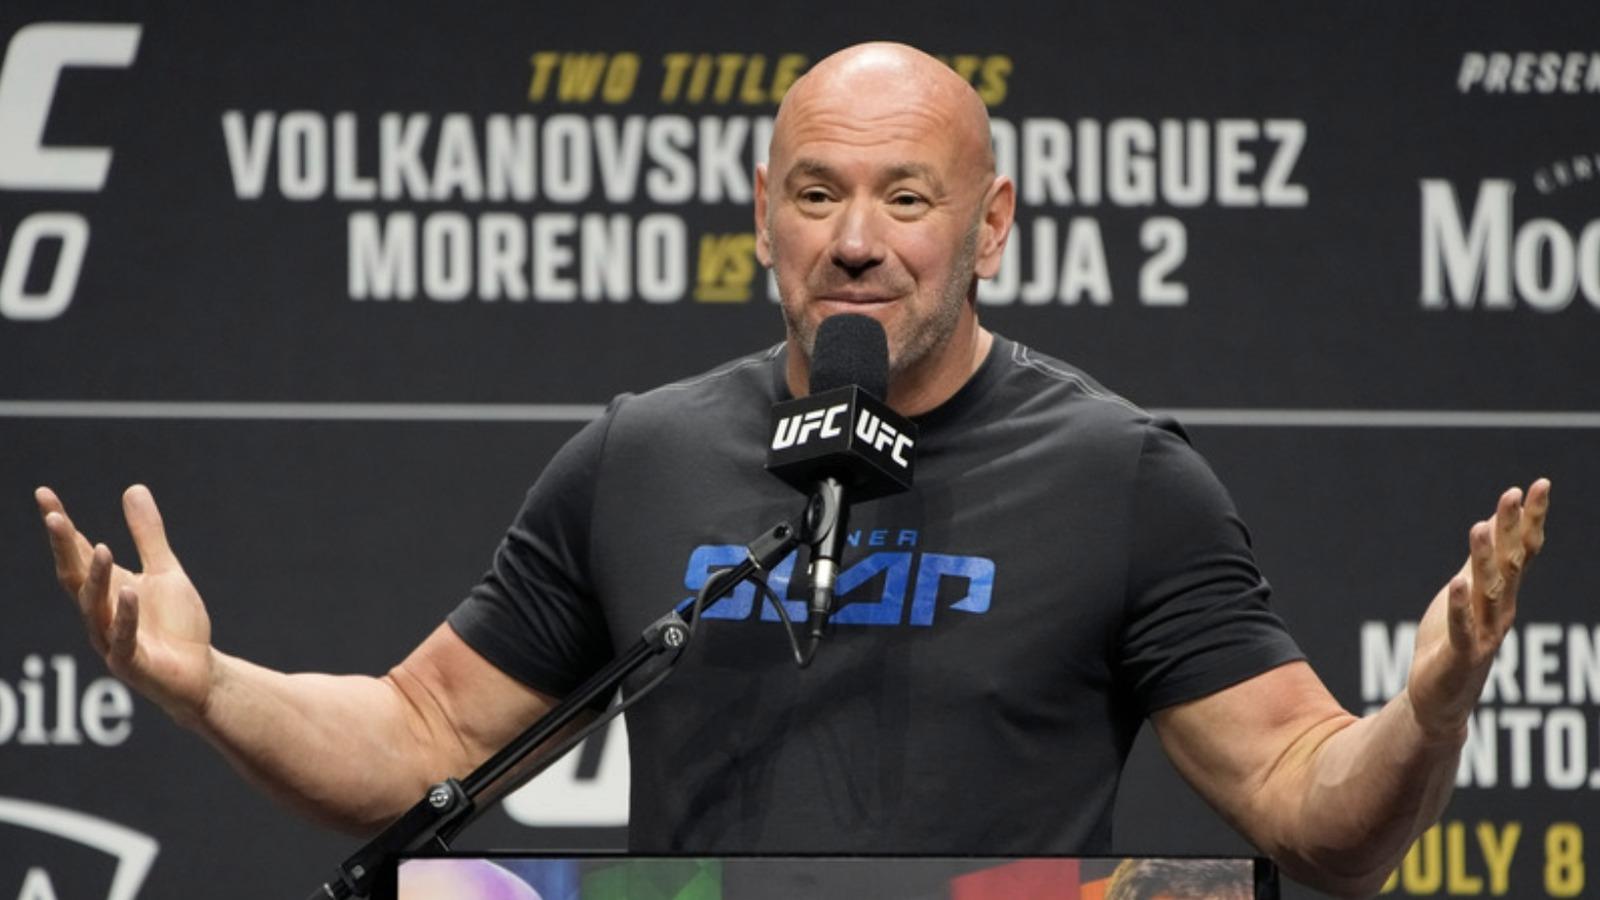 Dana White unveils his plans for a pay-per-view UFC card in England